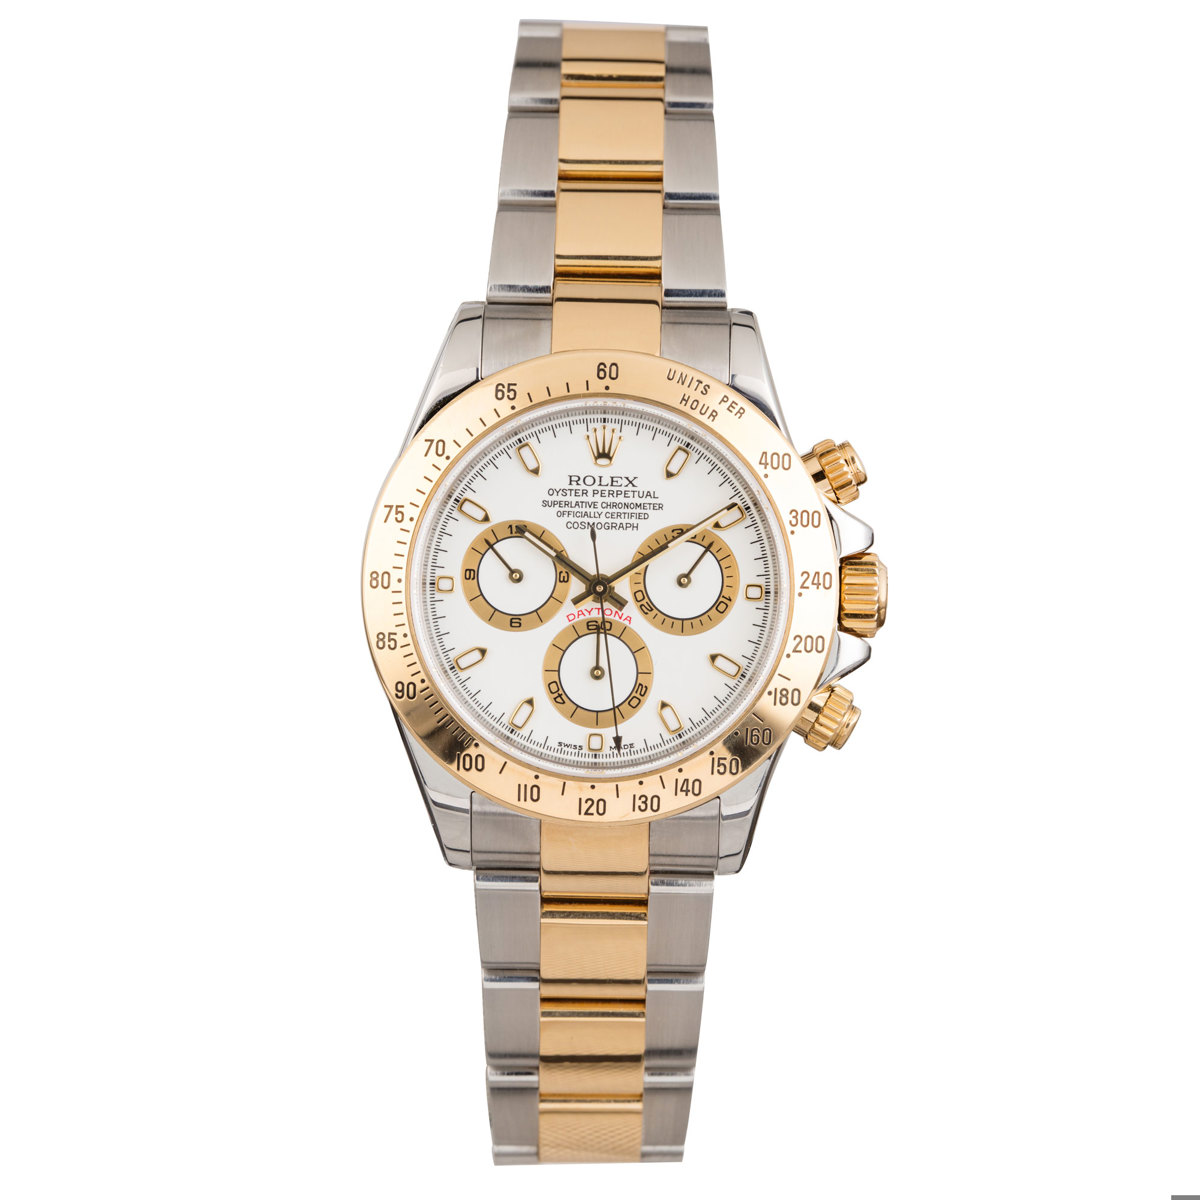 Rolex Daytona Ref 116523 A Stainless Steel Yellow Gold Chronograph Wristwatch with Bracelet Circa 2001 offered by Sotheby's